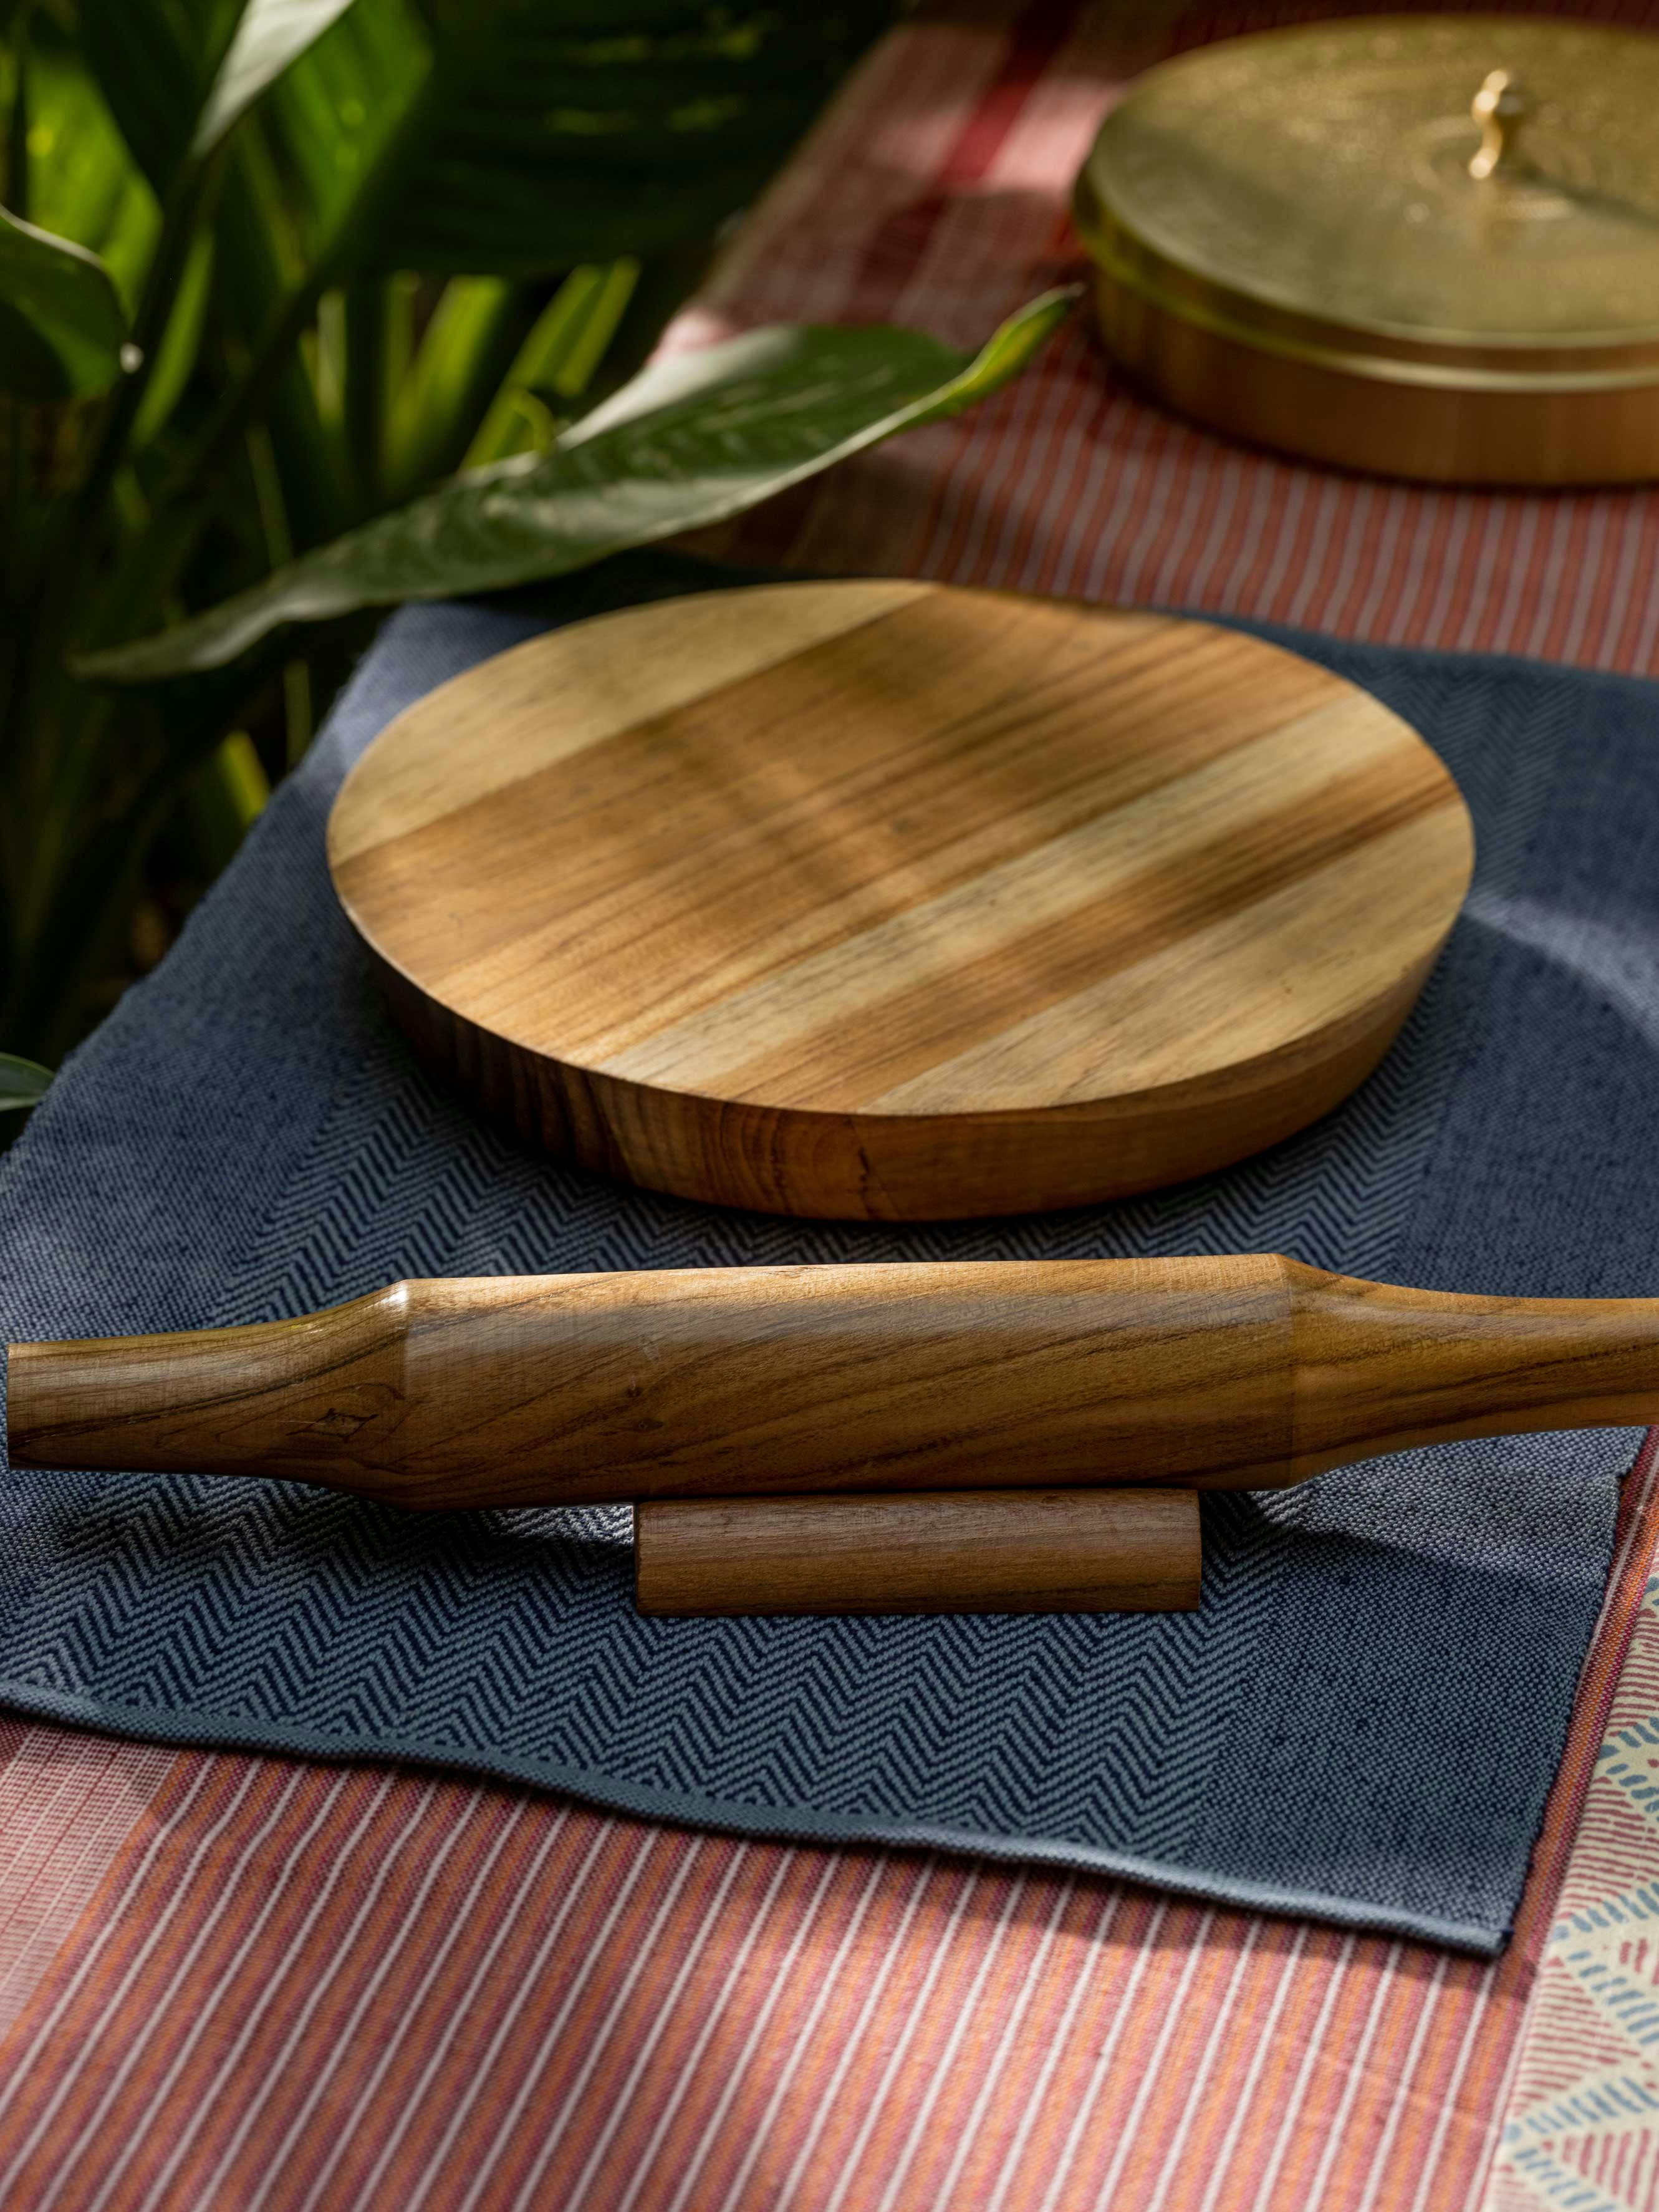 Varya - Wooden chakla belan with holder, a product by Araana Homes